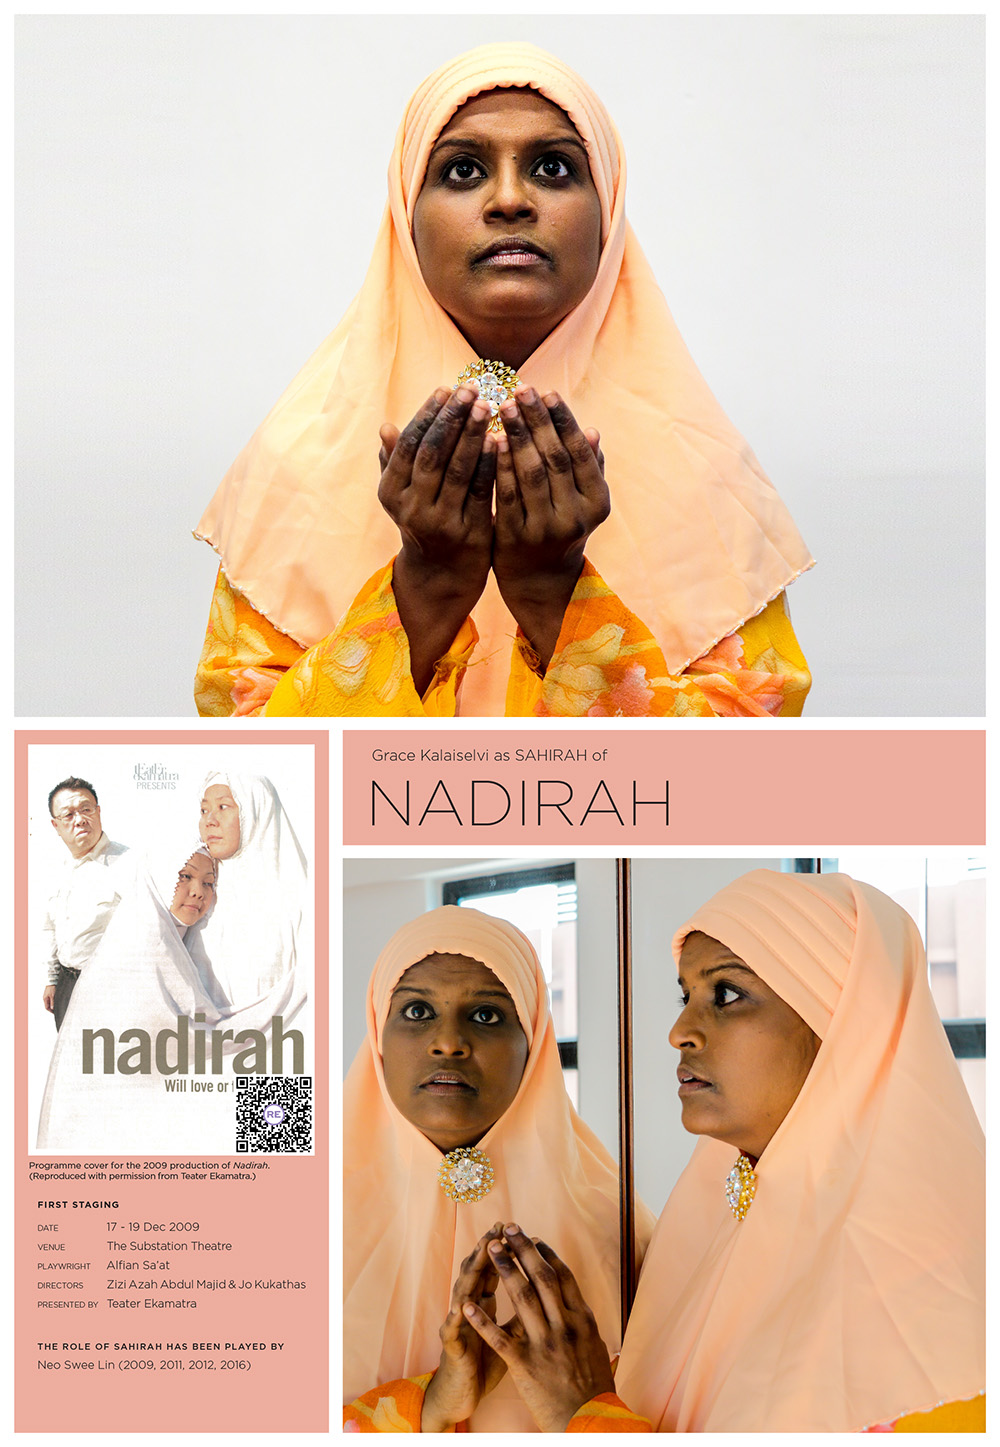 The top half of the poster features an ethnic Indian woman dressed in a peach colored headscarf. The bottom half of the image features the history of staging Nadirah.